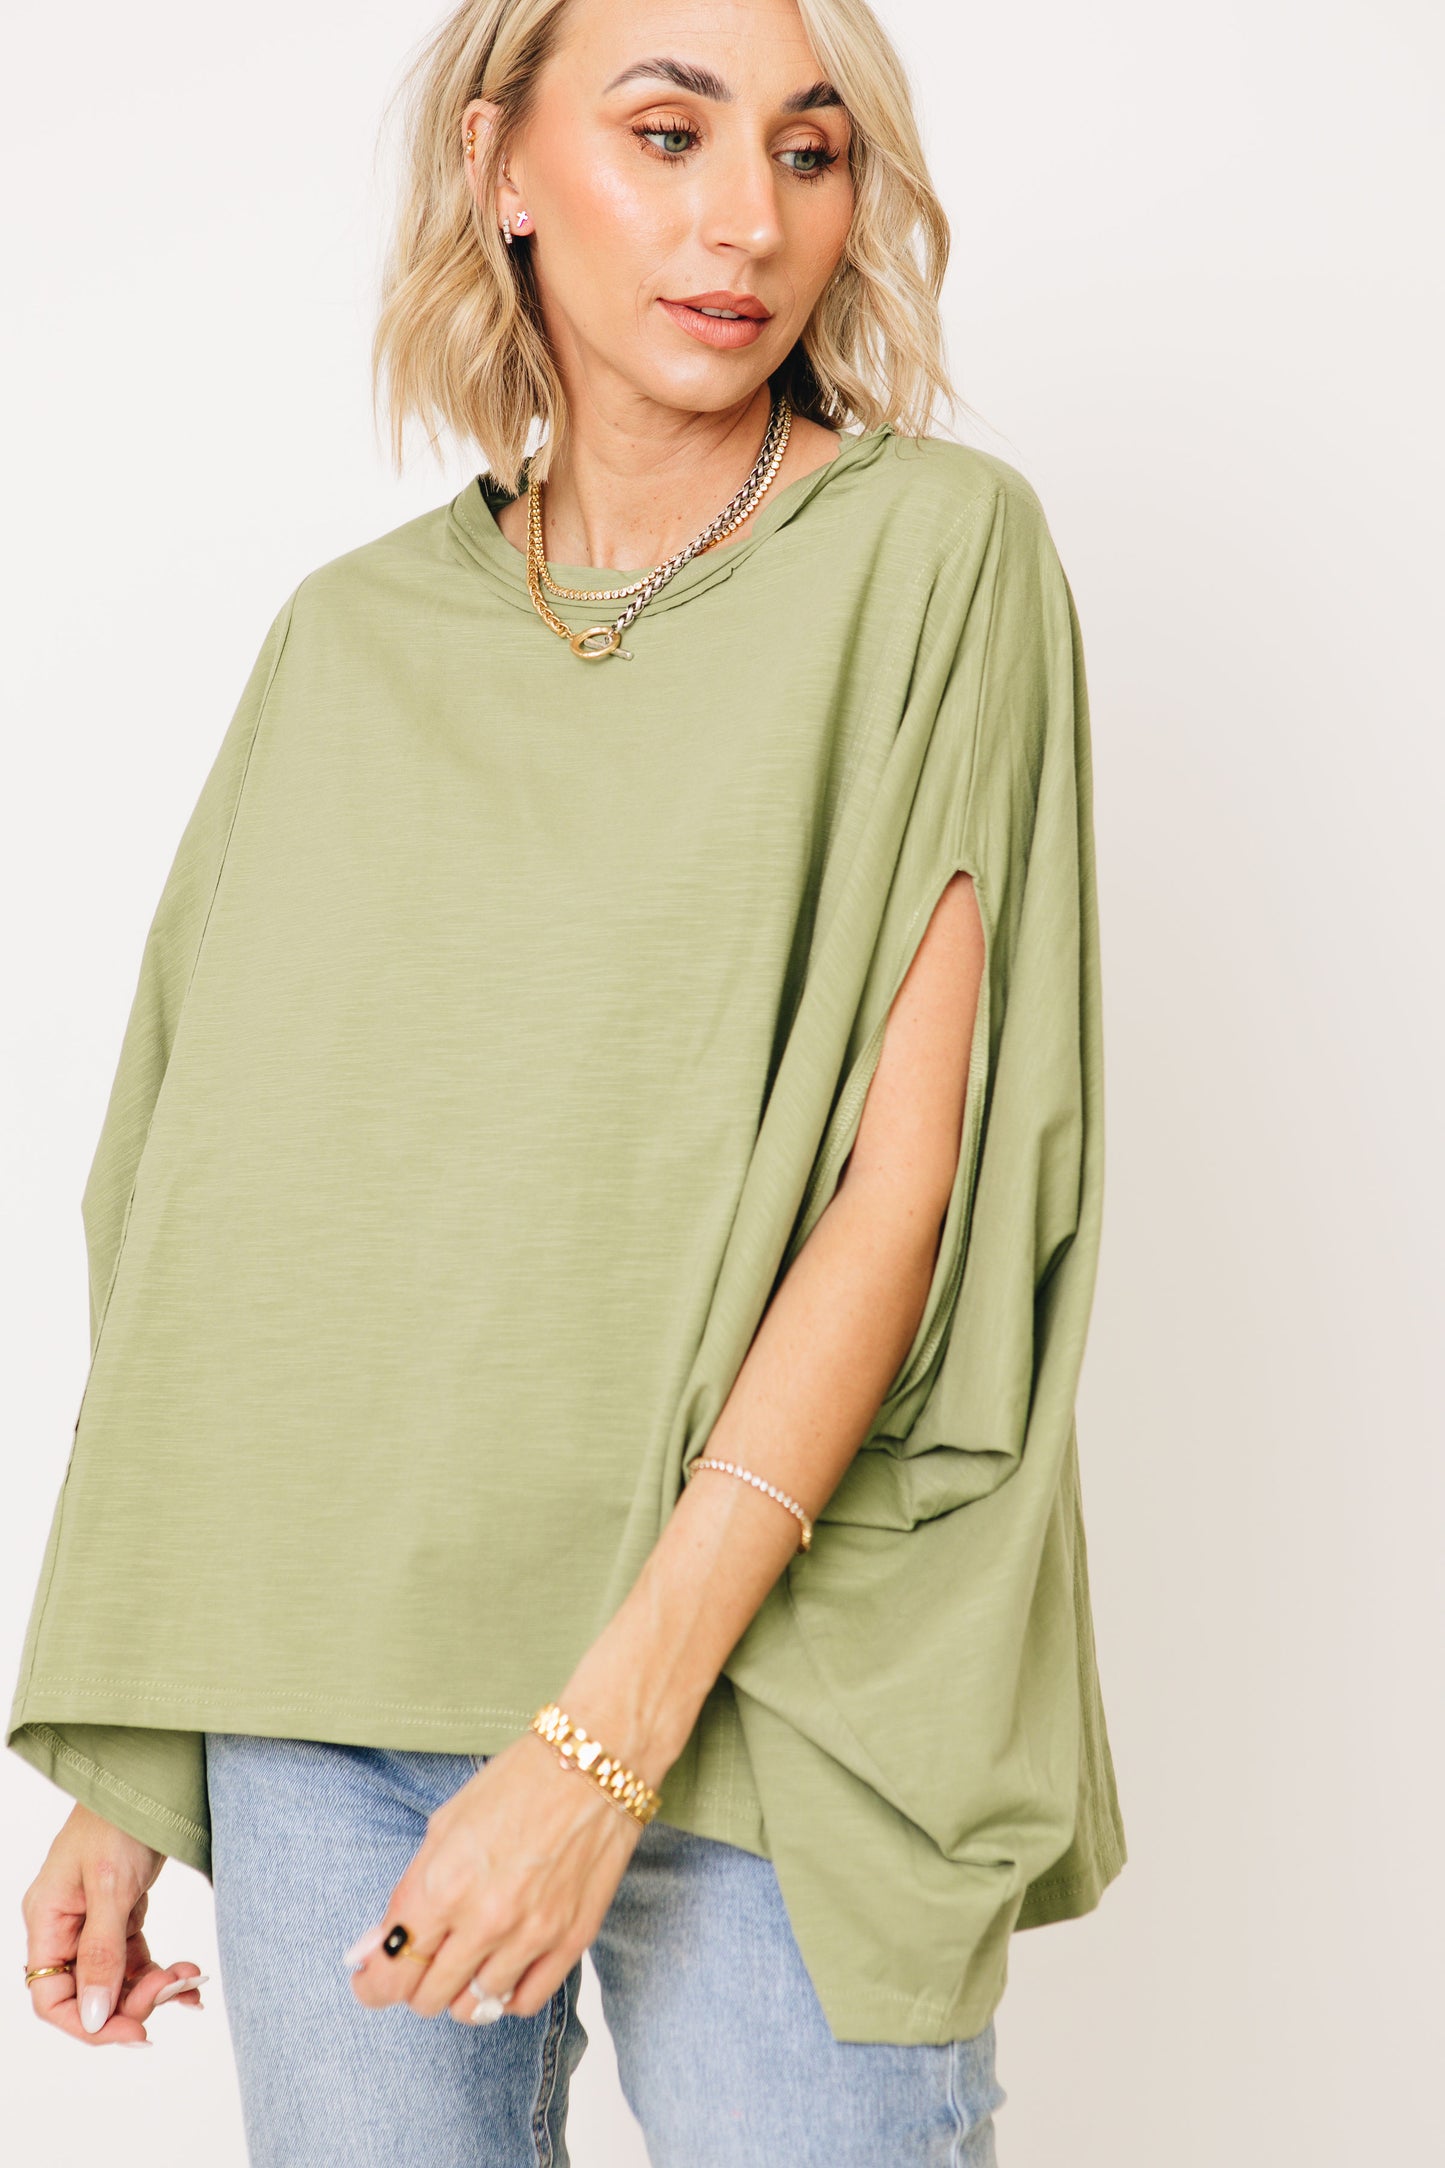 Blair Round Boat Neck Oversized Knit Top (S-3XL)